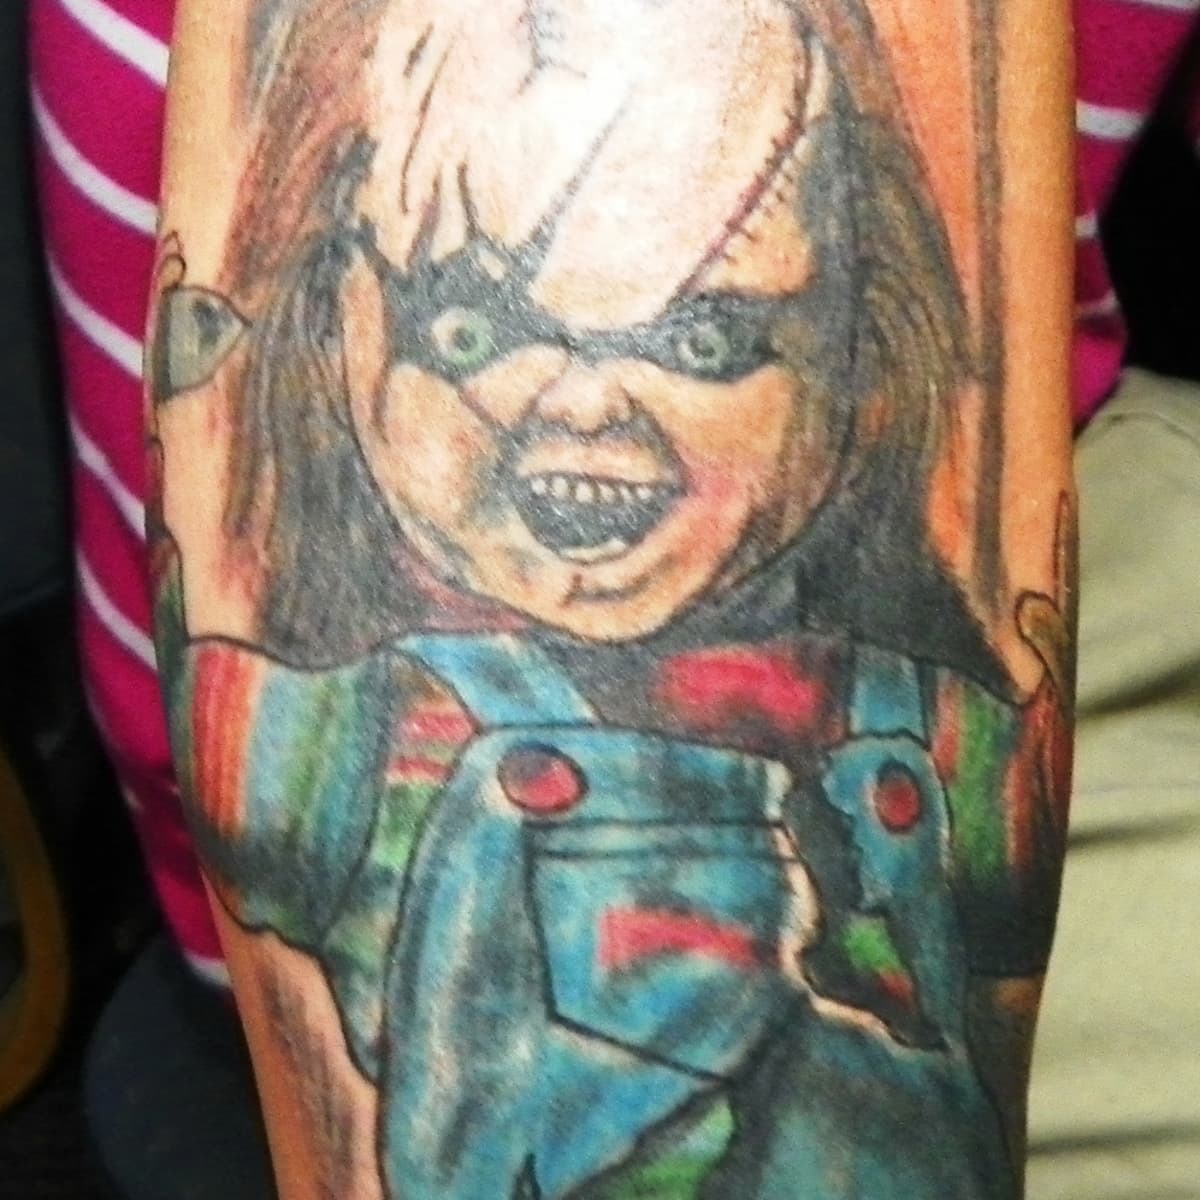 Soular Tattoo  Chucky from Childs play Matt and Tyler worked on today  this is going to be a leg sleeve of horror movie legends  Facebook